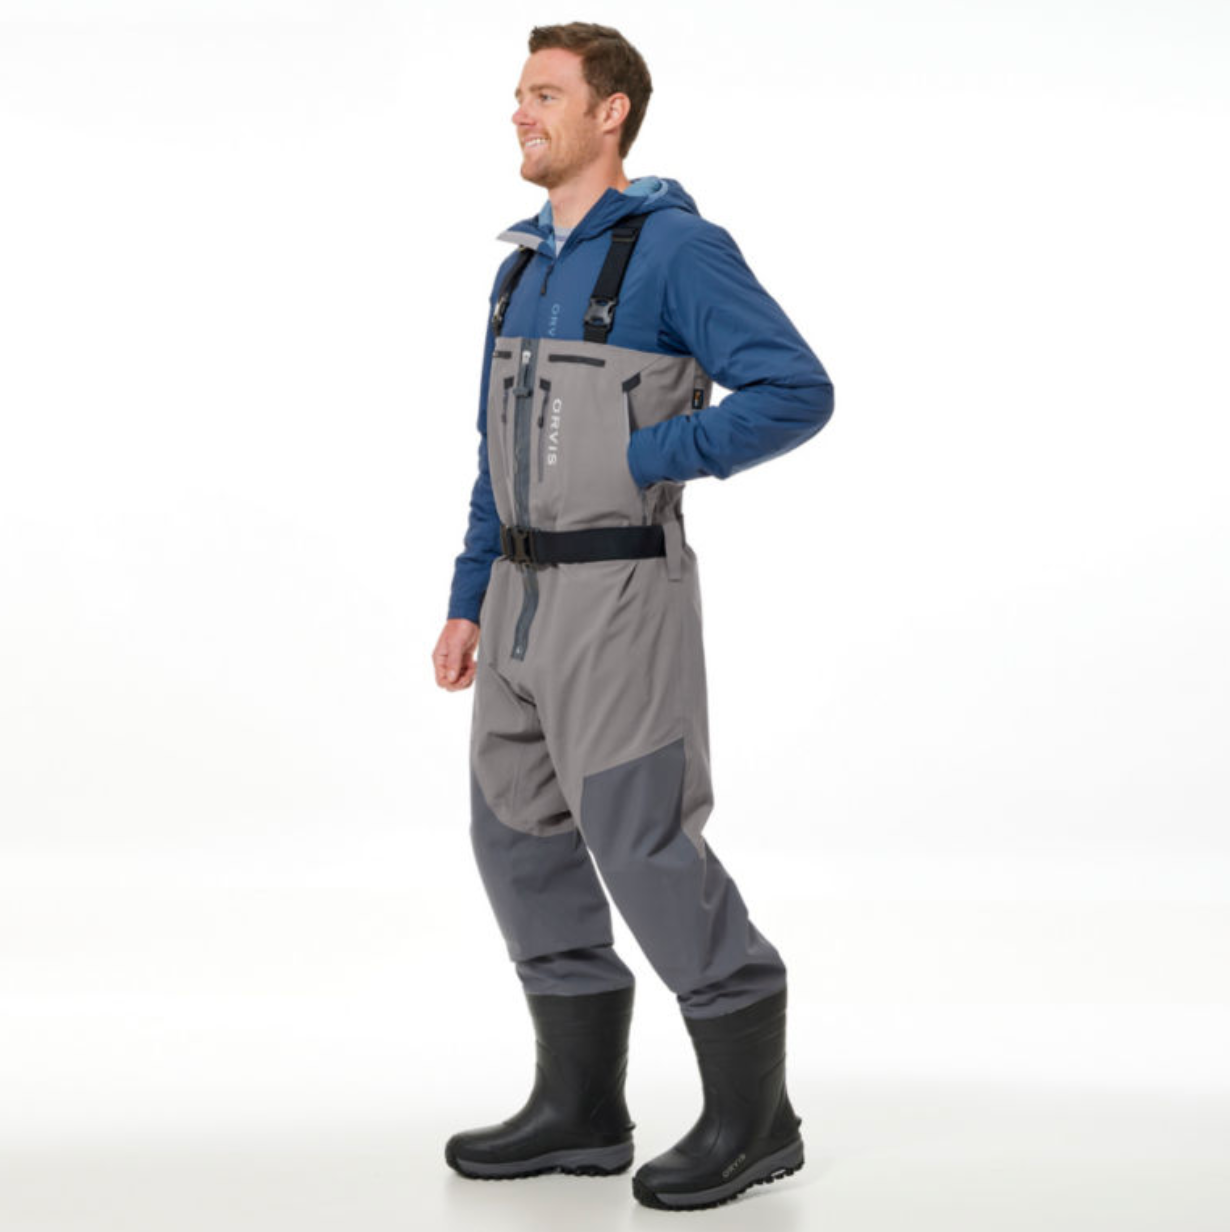 Orvis Waders Size & Fit Guide